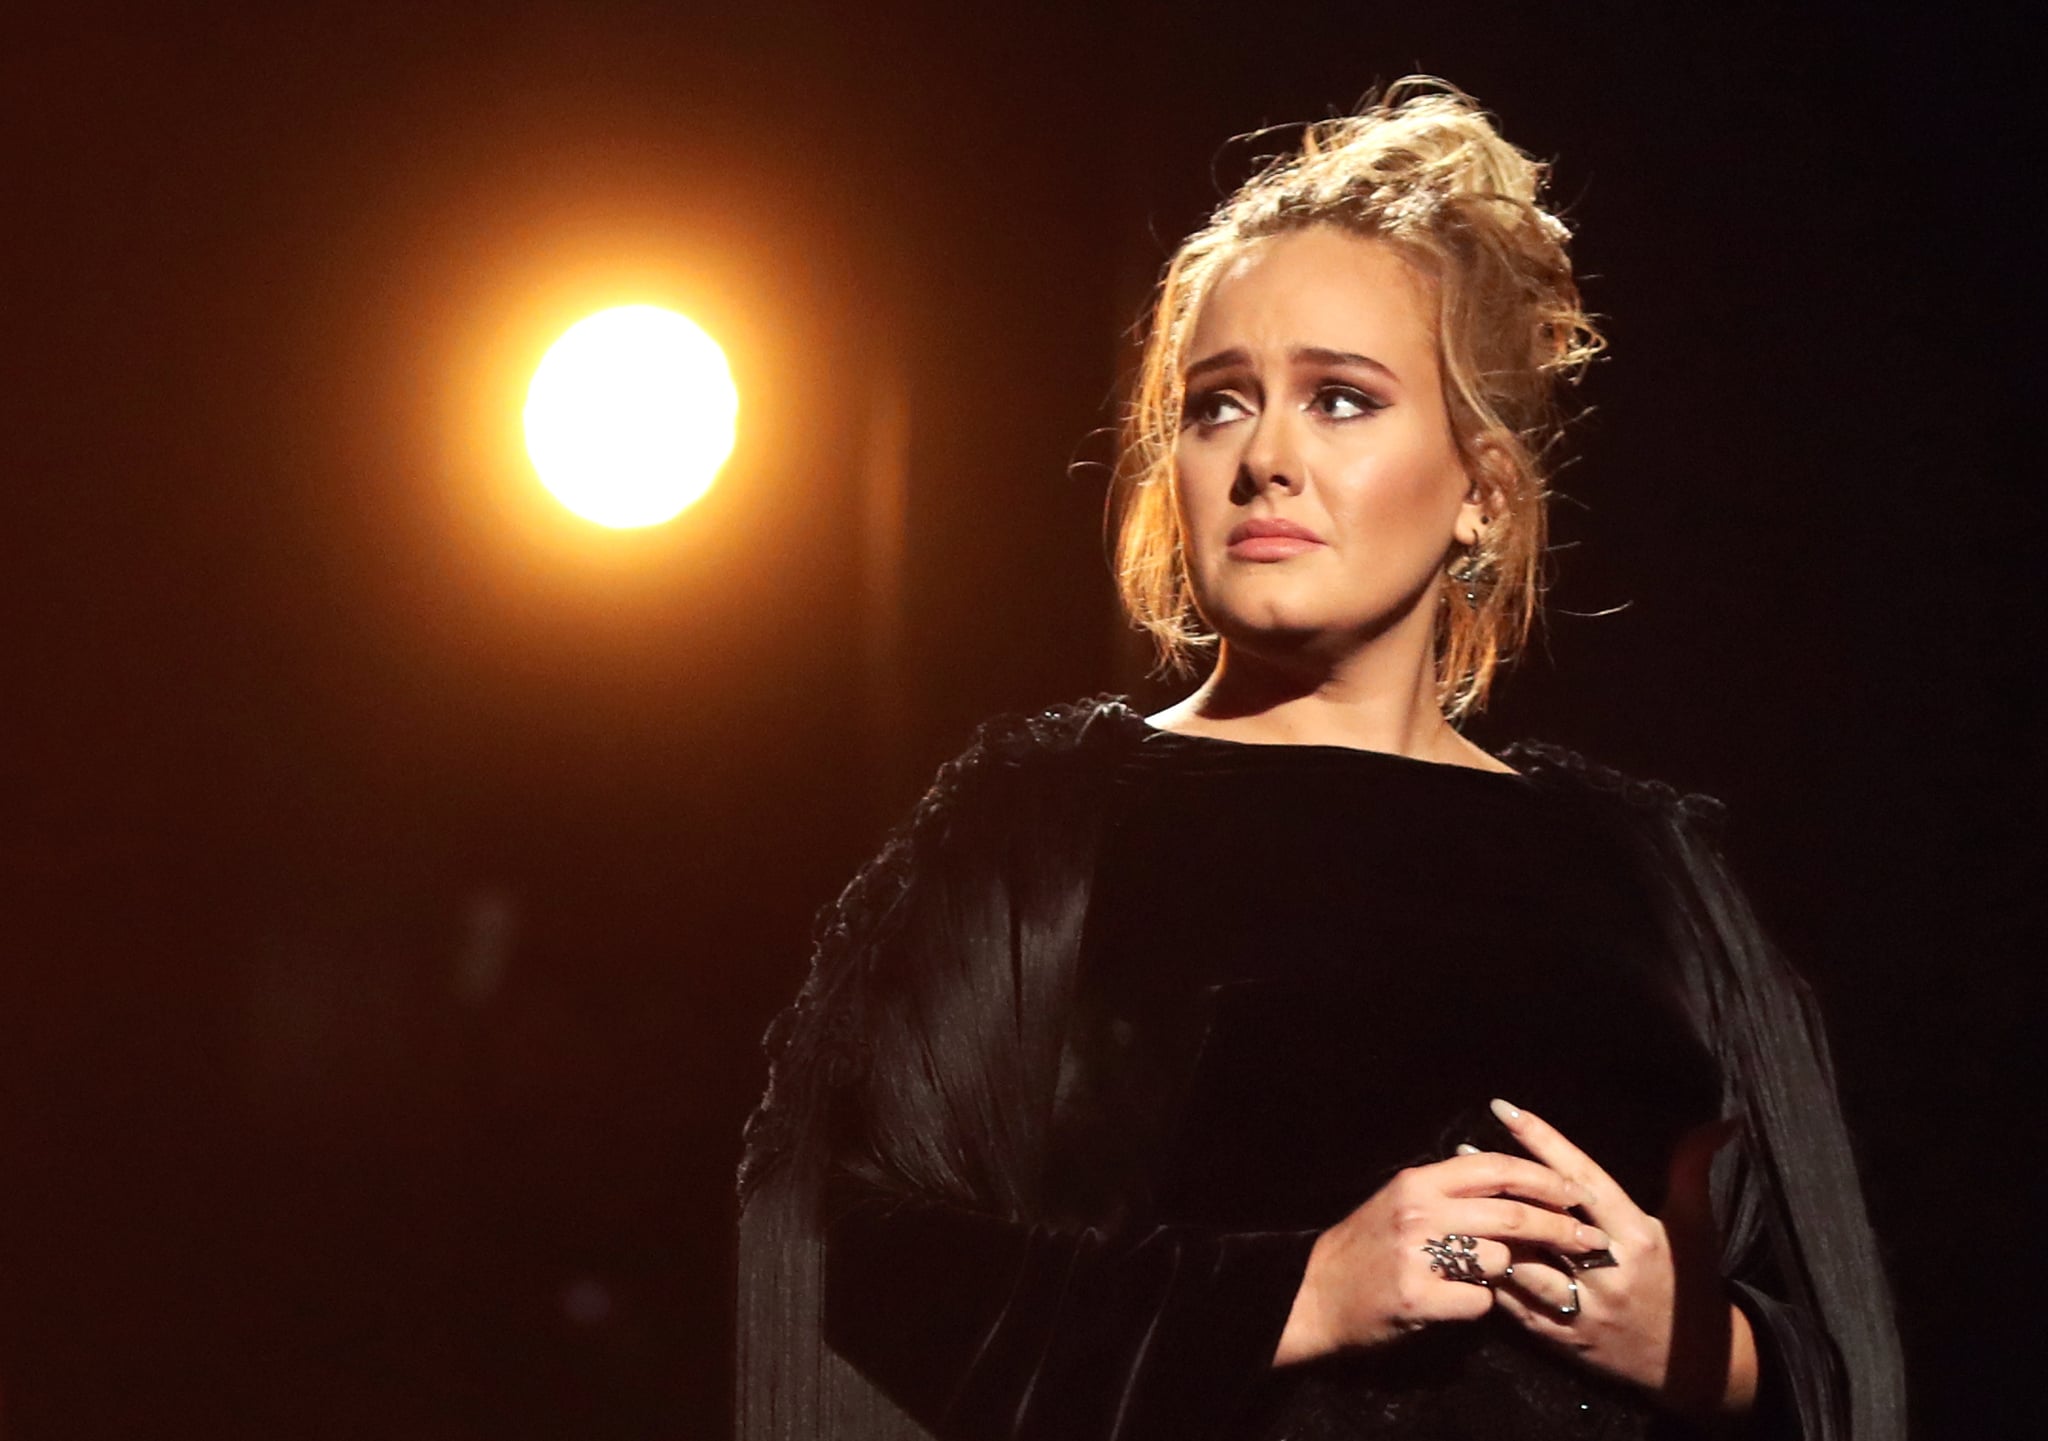 Adele Talking About George Michael at the 2017 Grammy Awards | POPSUGAR Entertainment2048 x 1441